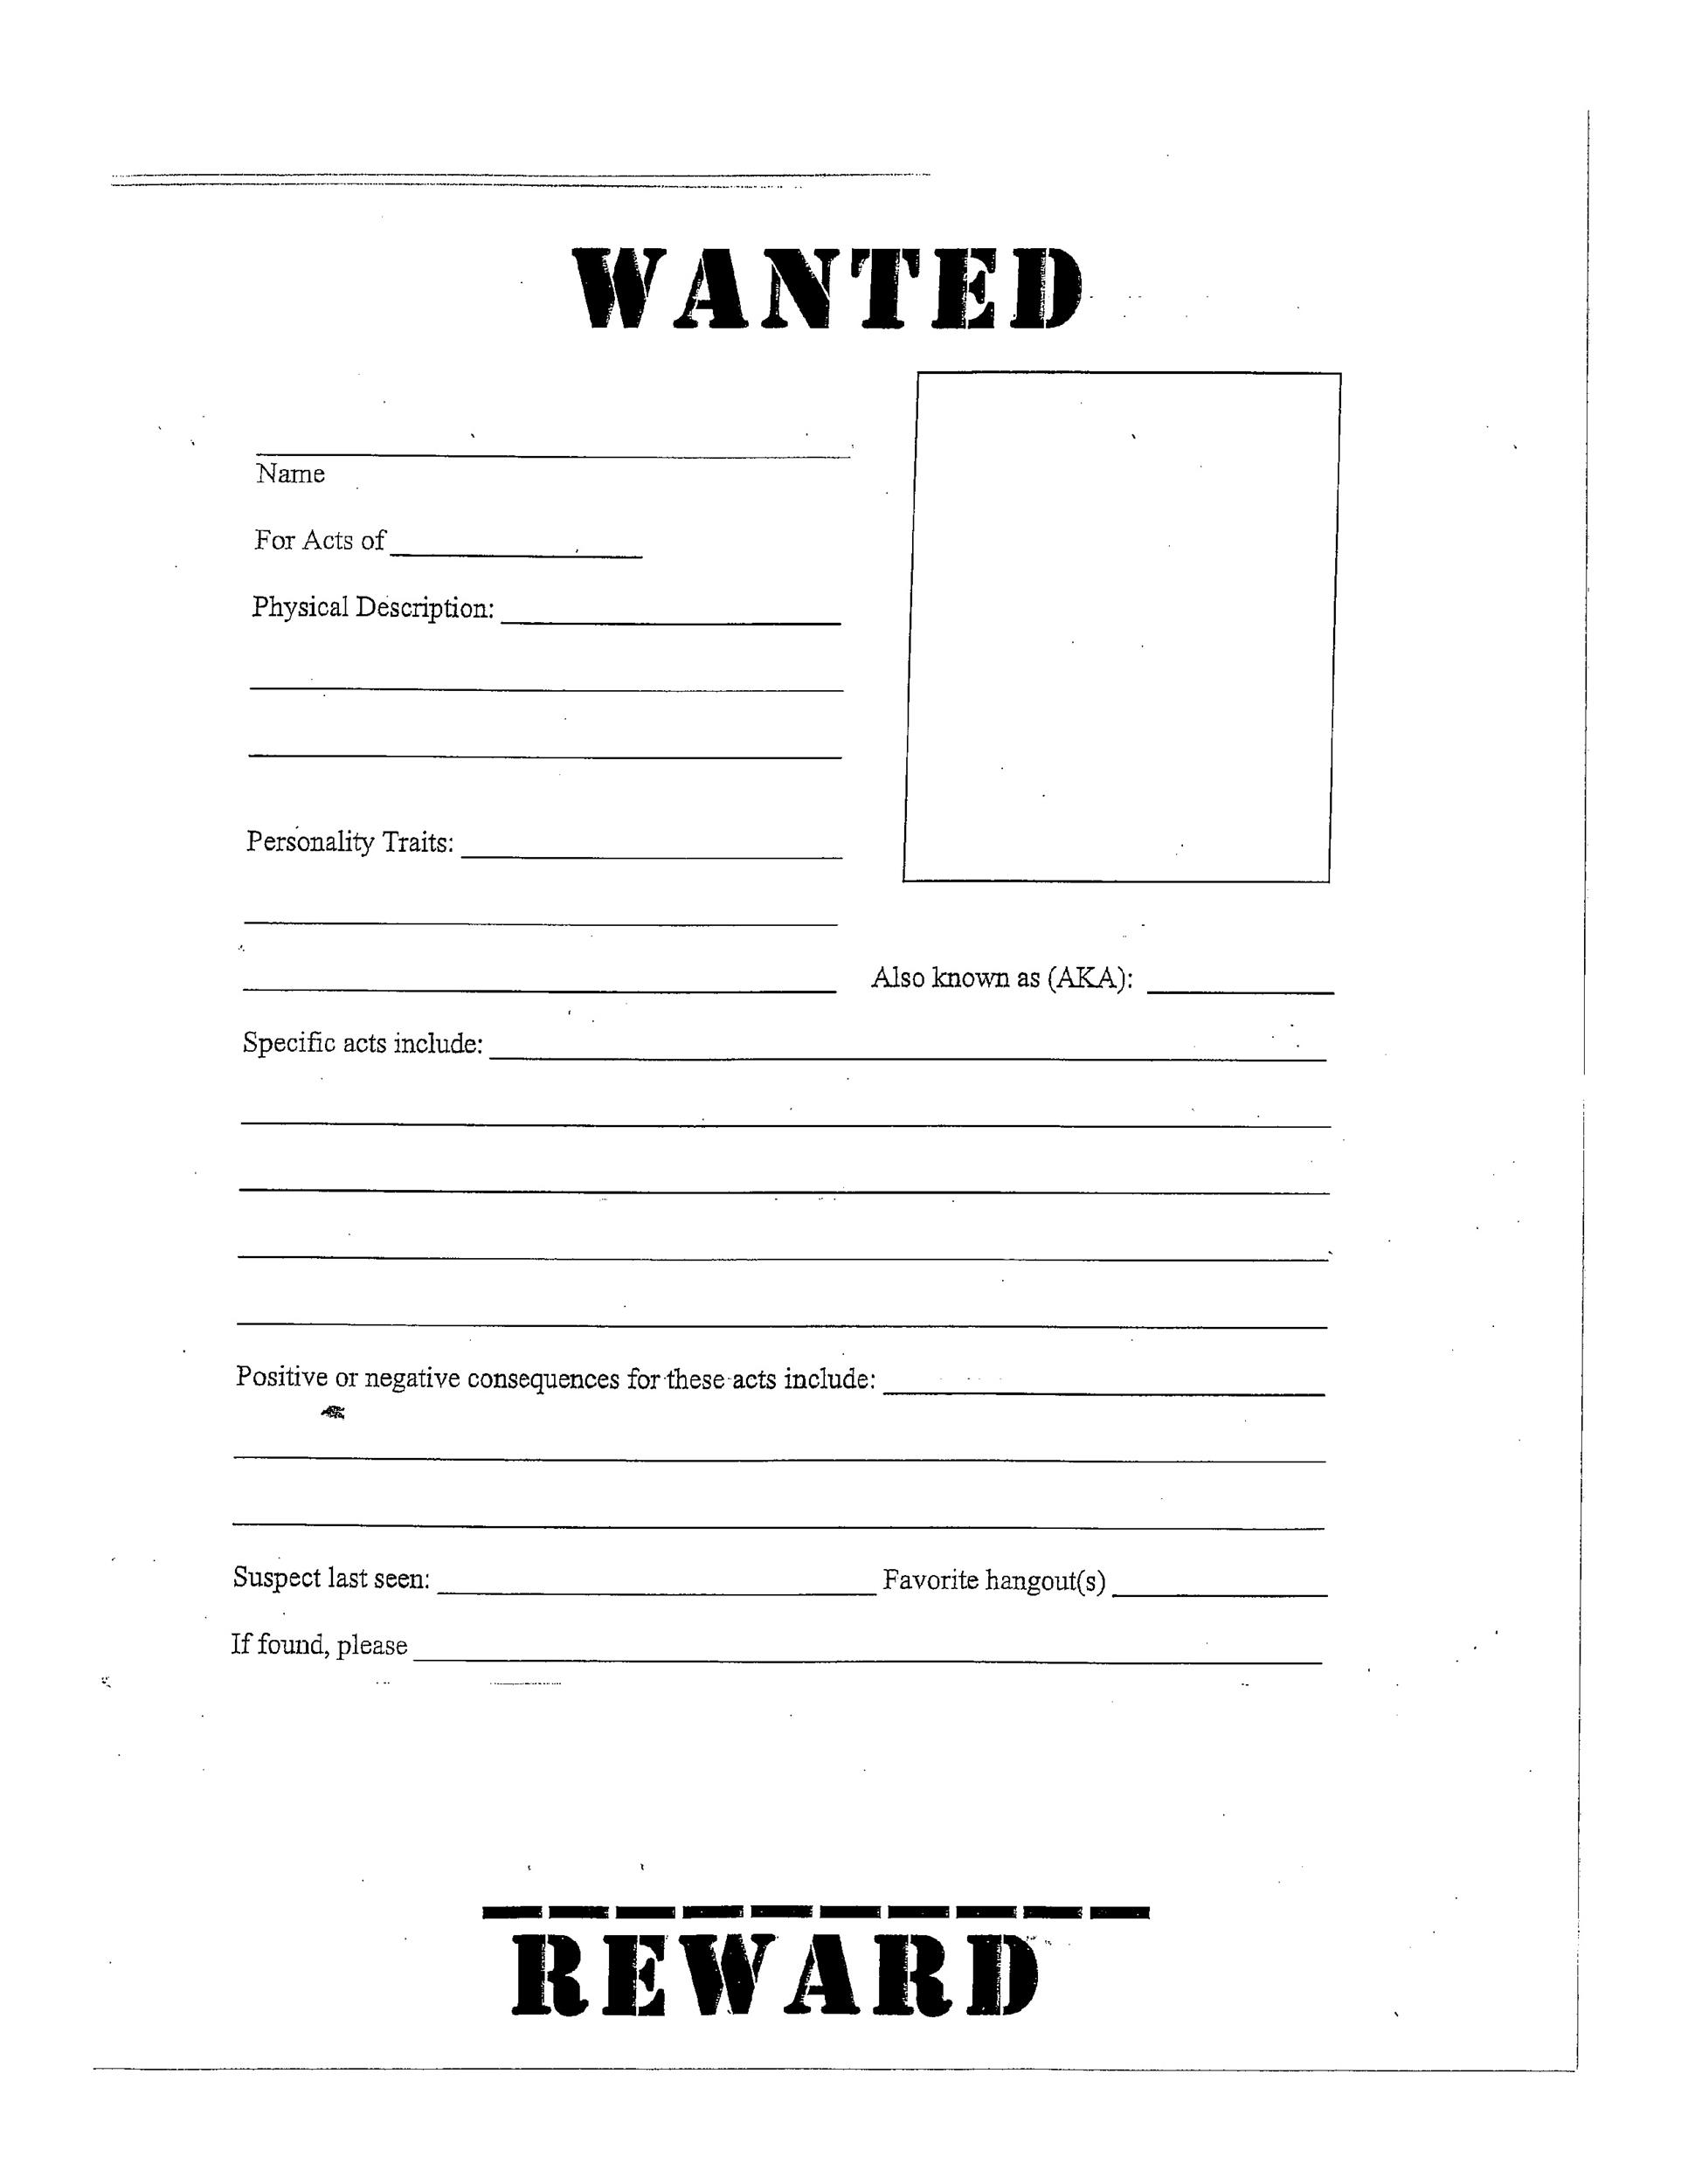 printable-downloadable-wanted-poster-template